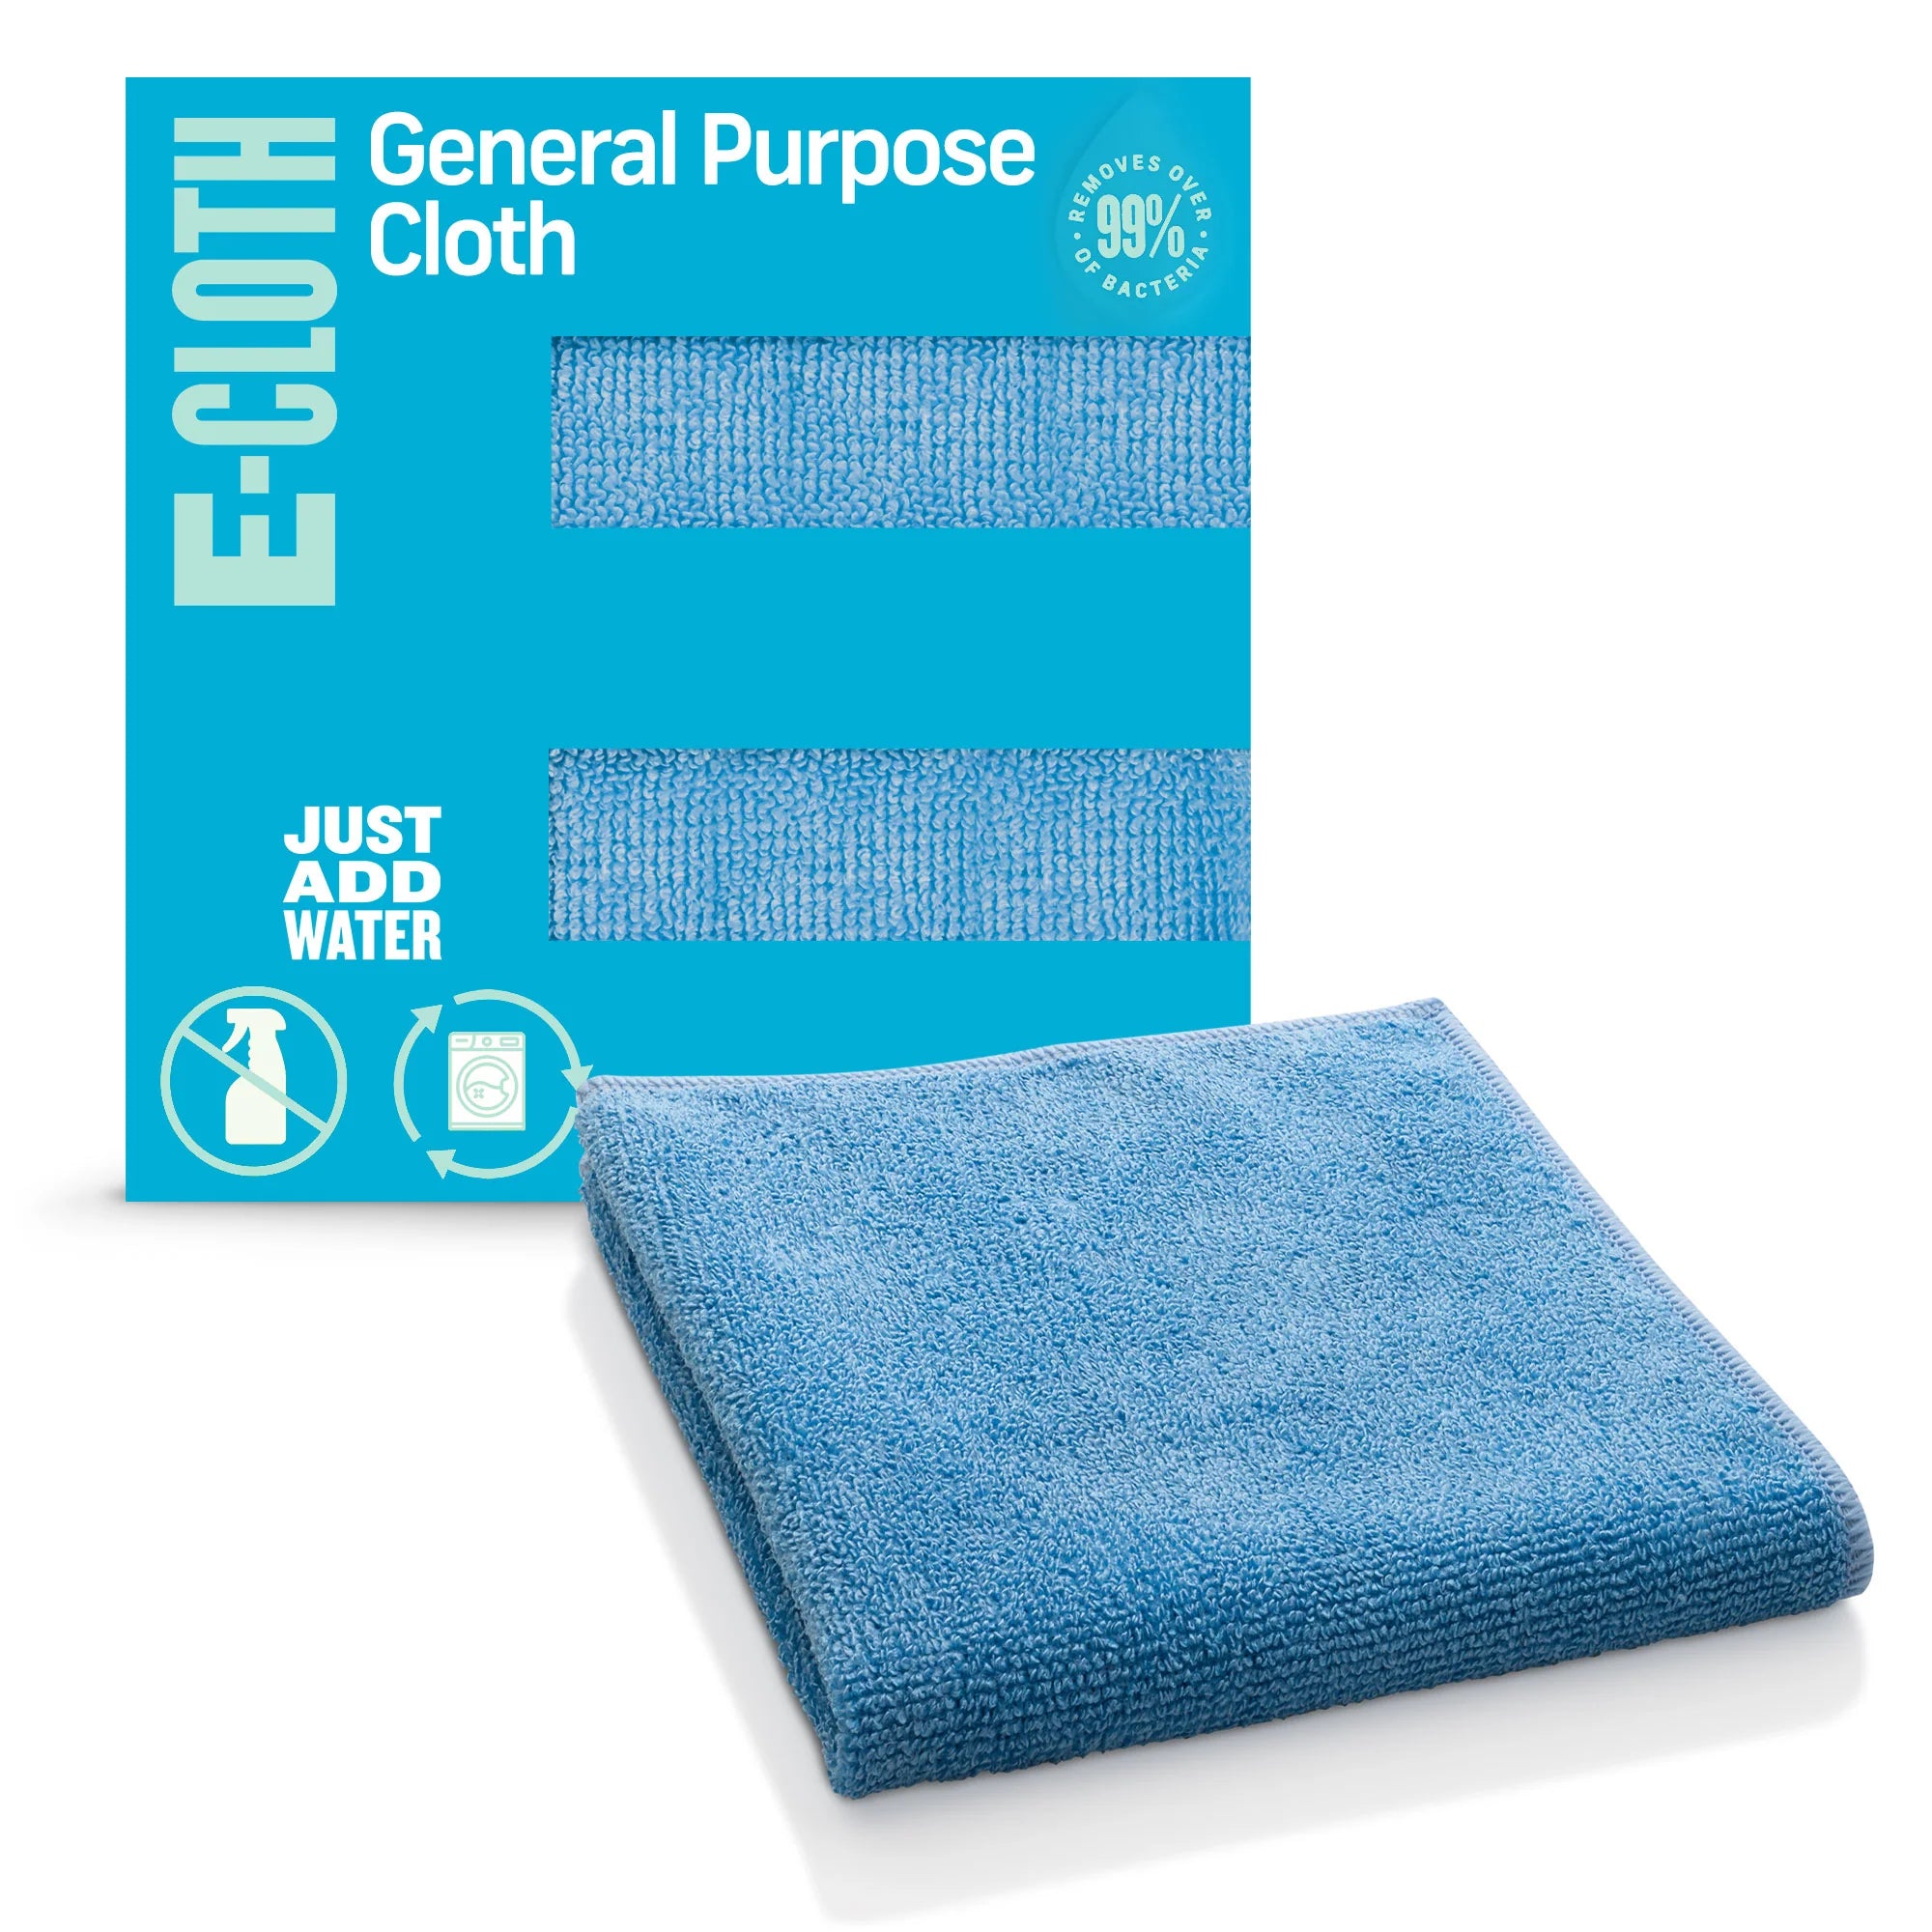 A-1 Vacuum, General Purpose Cleaning Cloth